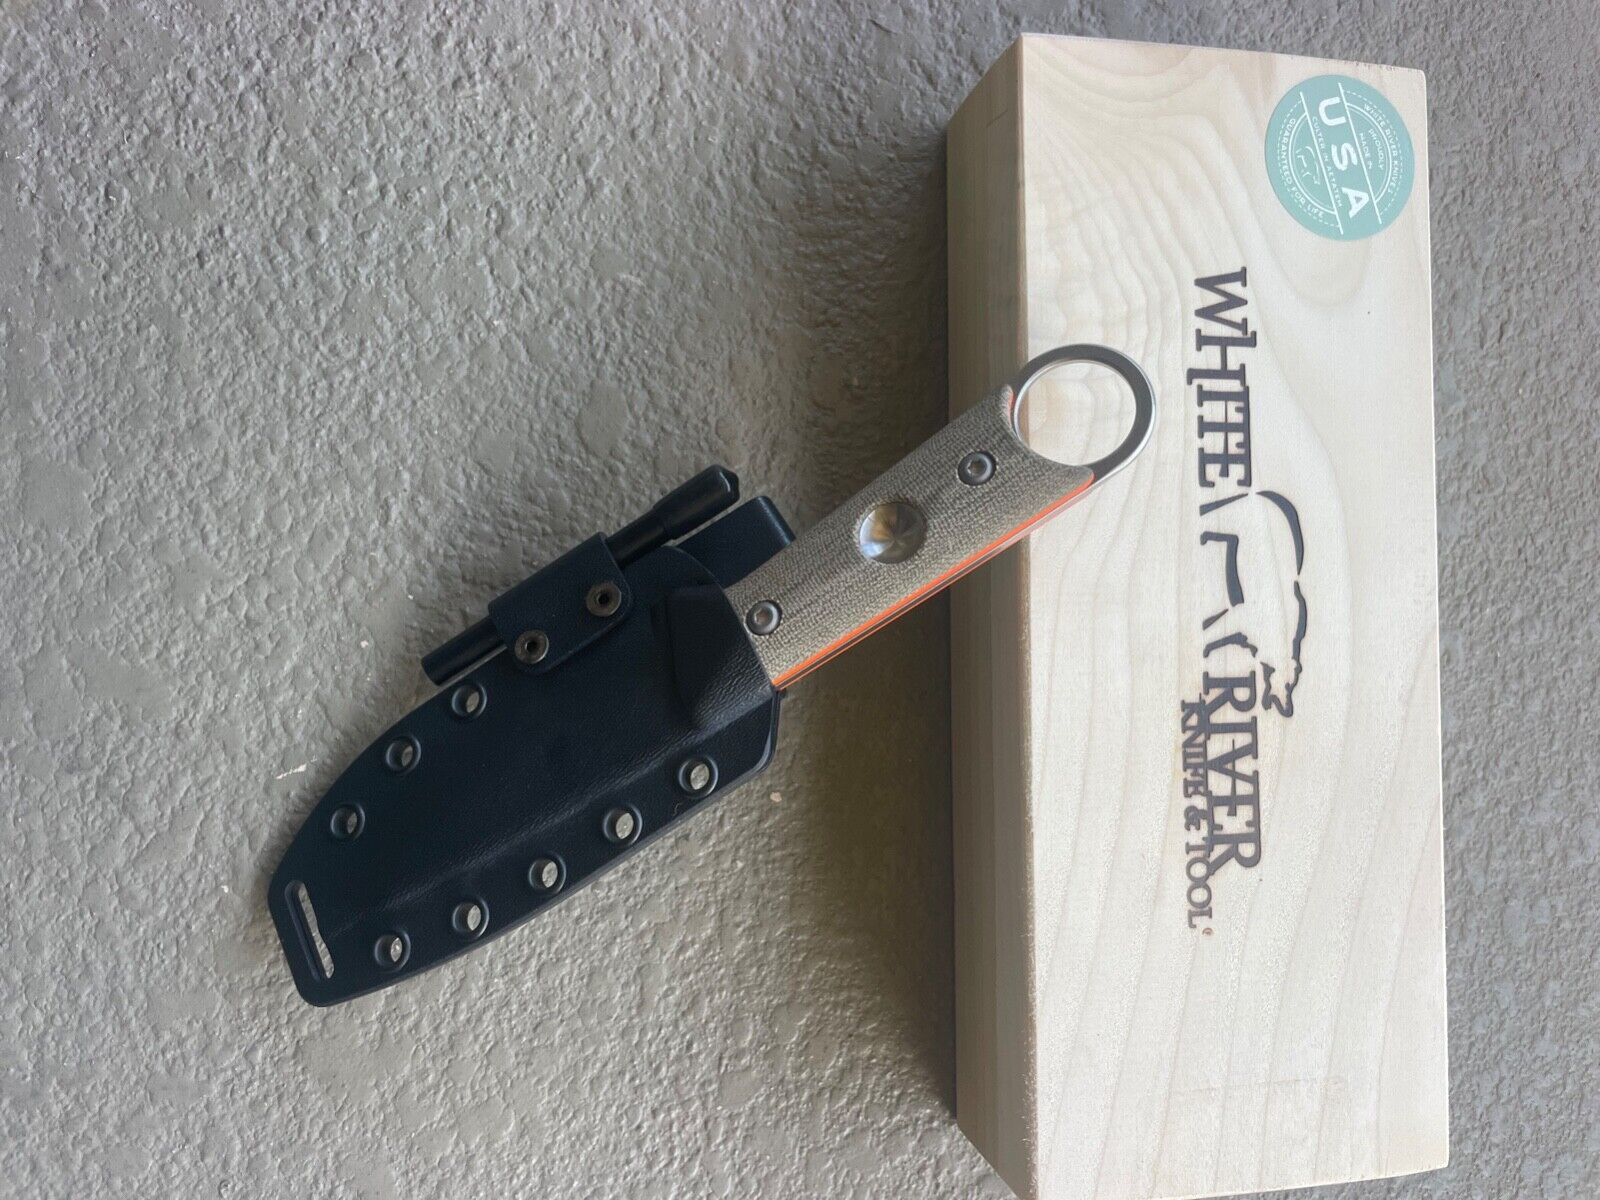 White River Firecraft pro knife with kydex sheath and ferro rod